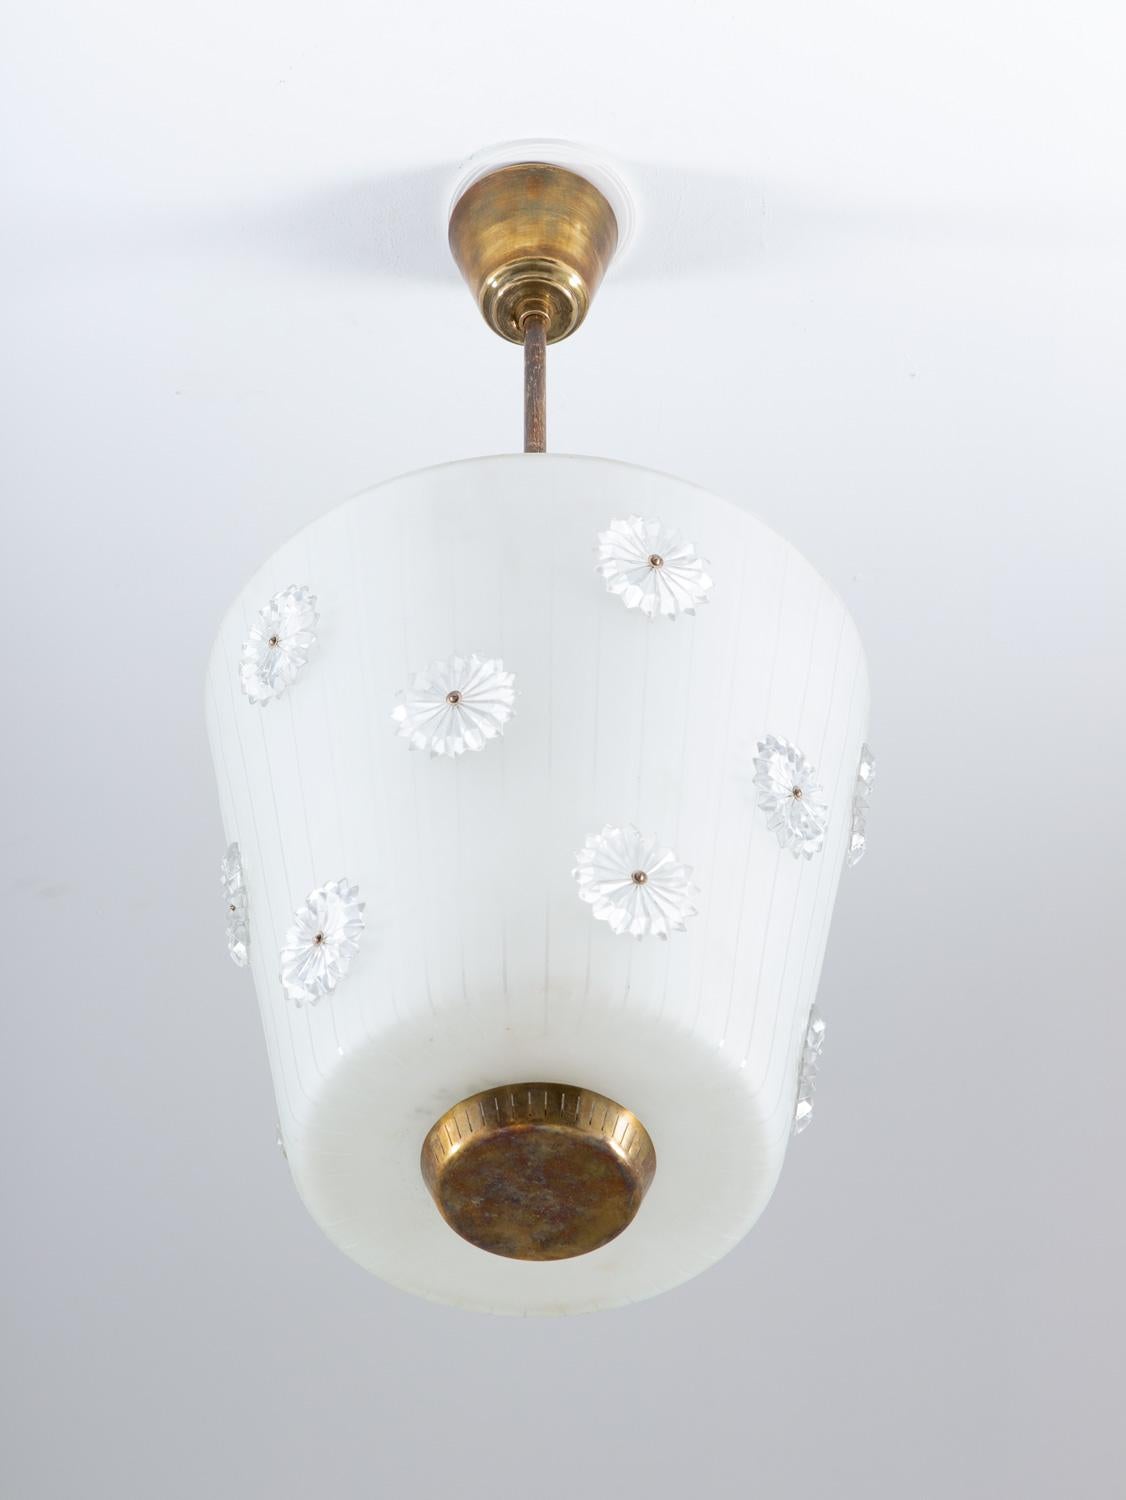 Scandinavian Pendant in Brass and Glass by Böhlmarks, Swedish Modern Era, 1940s In Good Condition For Sale In Karlstad, SE